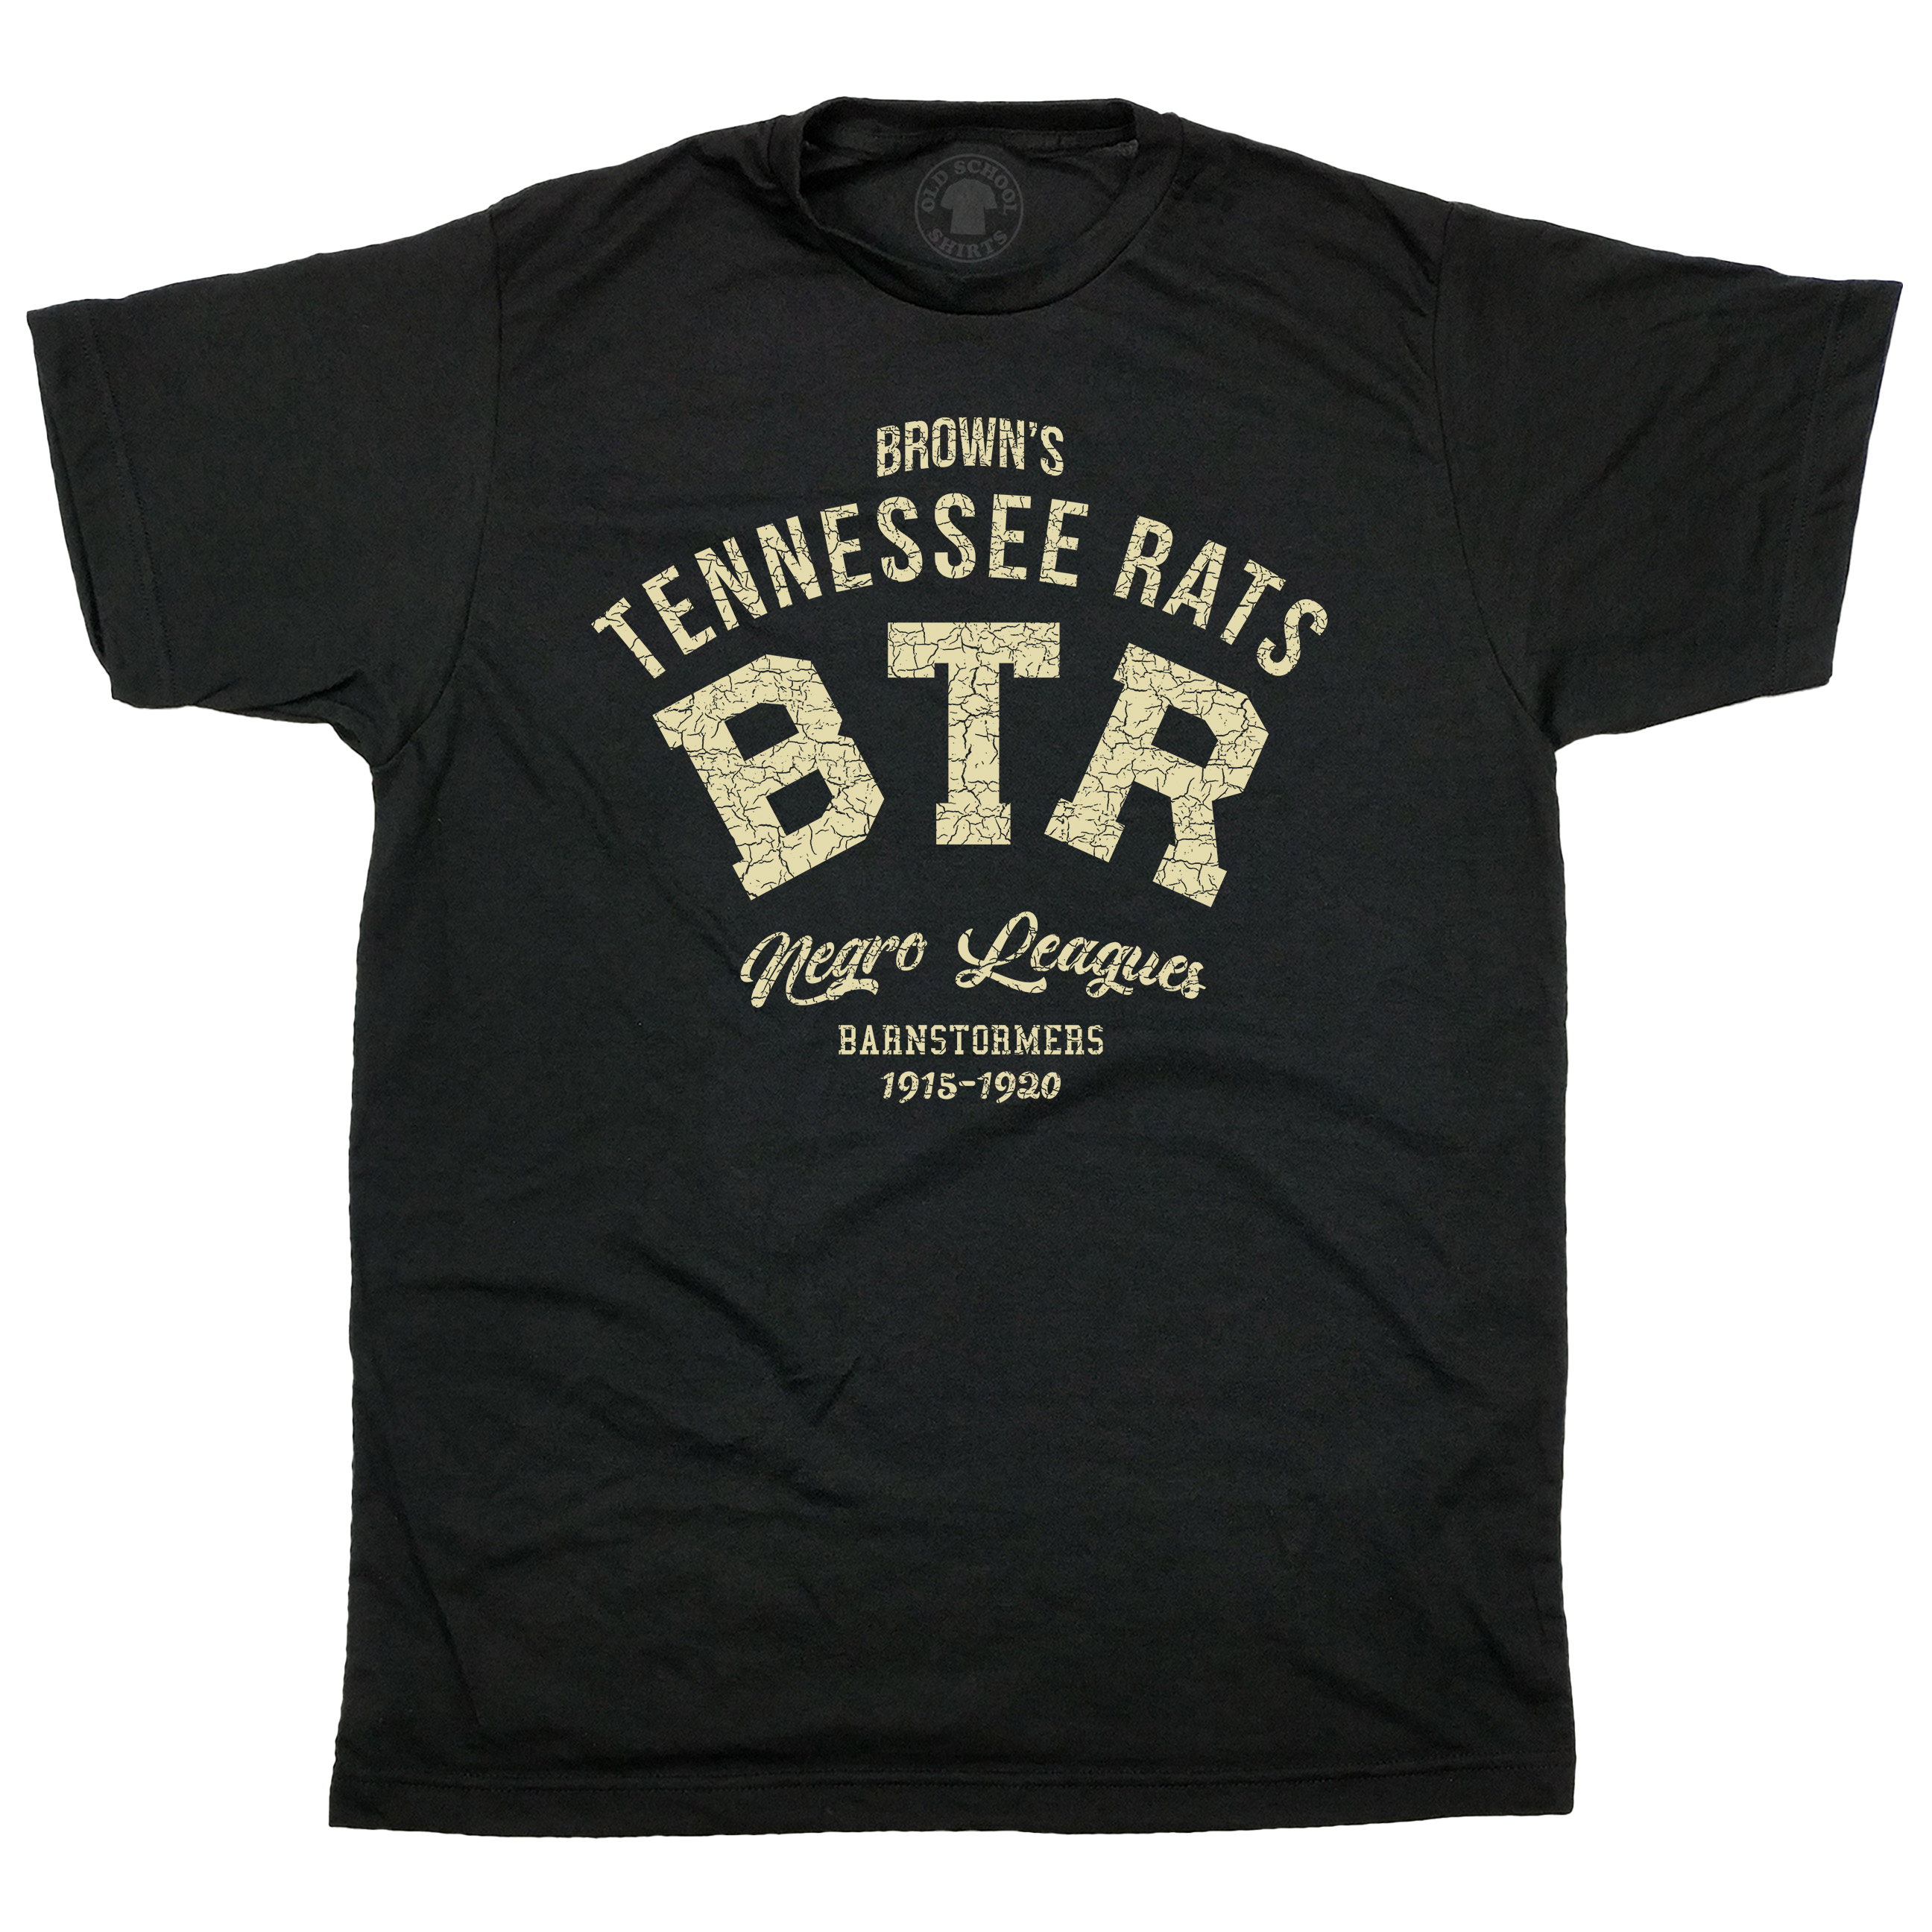 Brown's Tennessee Rats tee